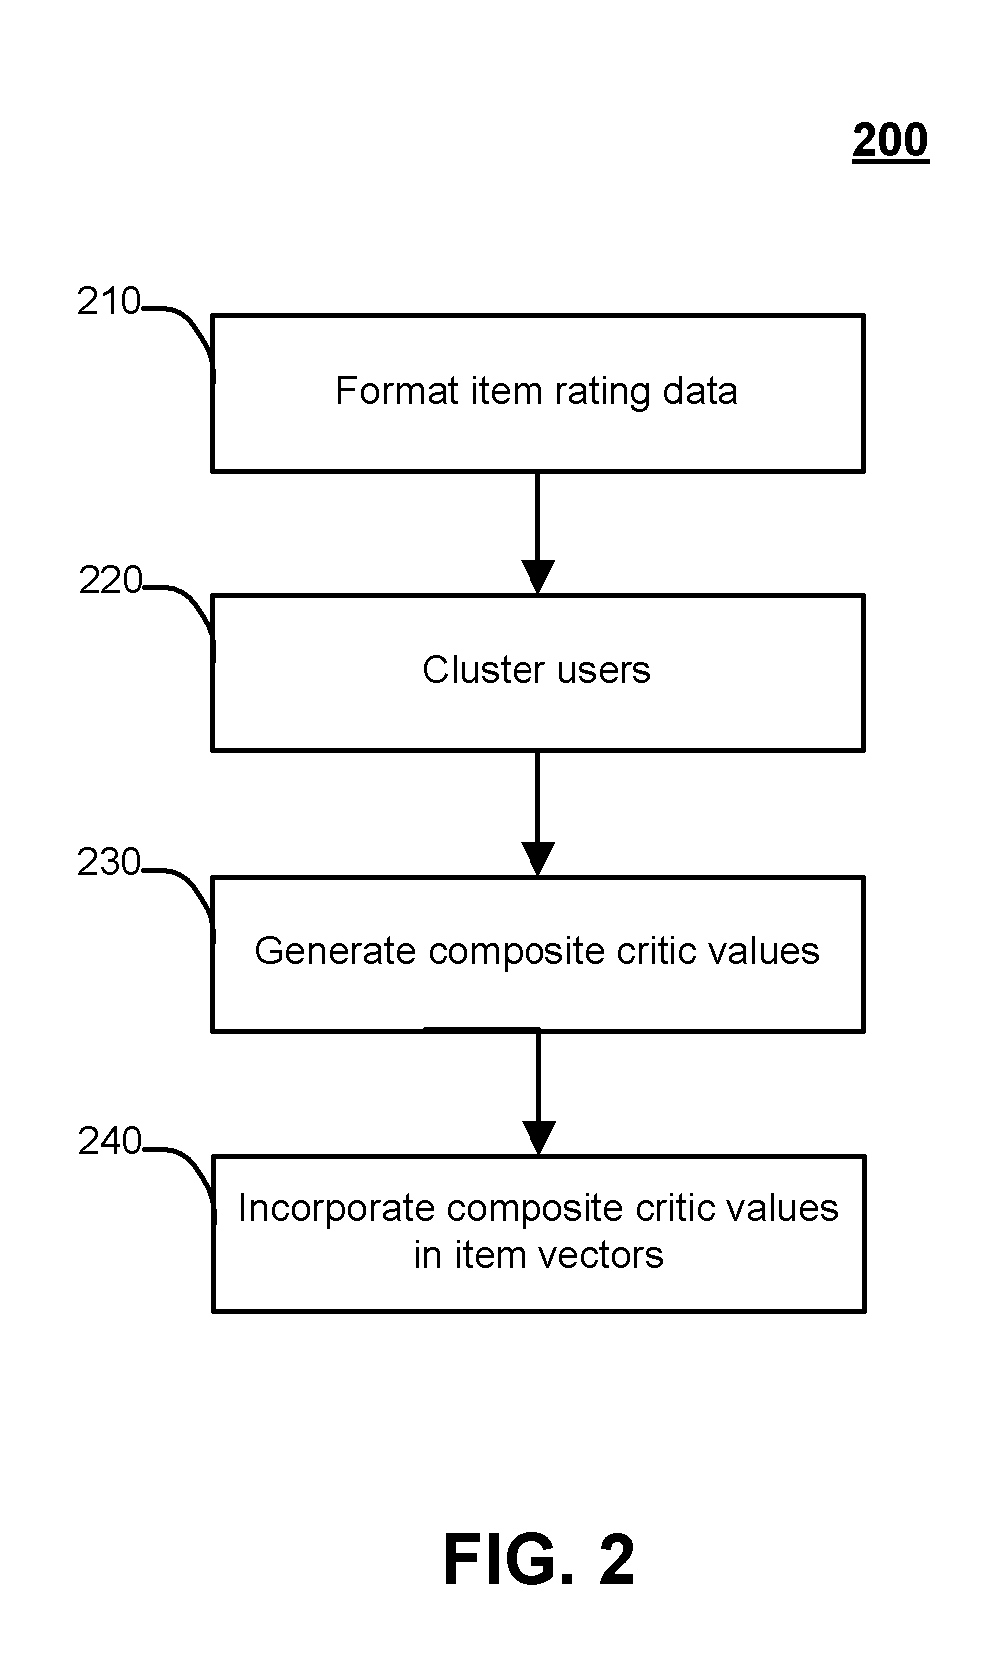 Systems and methods for supplementing content-based attributes with collaborative rating attributes for recommending or filtering items